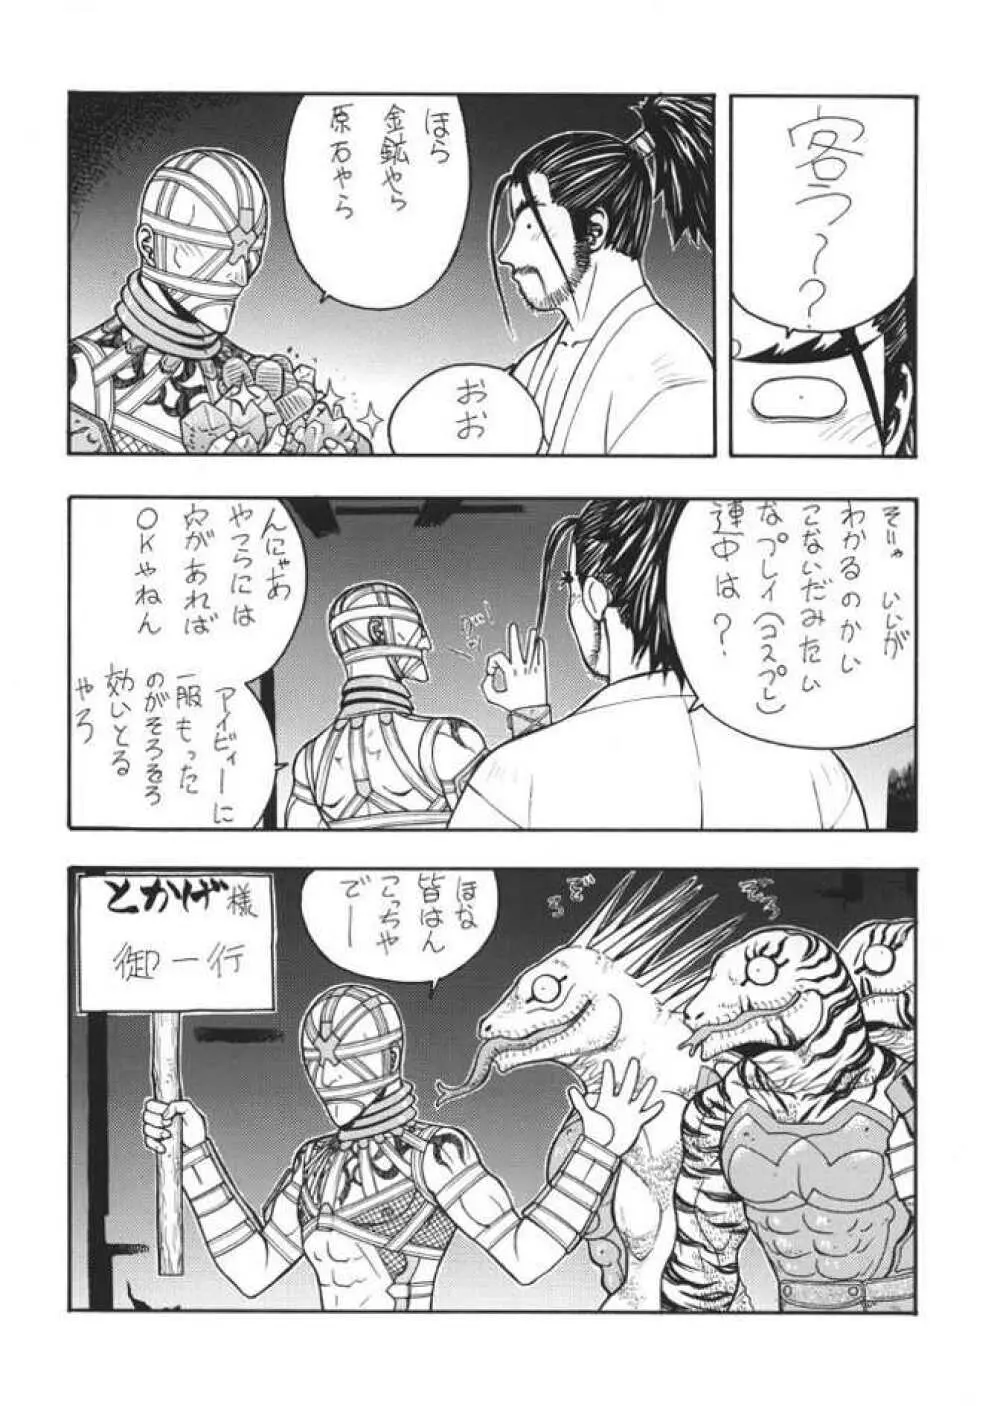 Fighters Giga Comics Round 6 Page.6